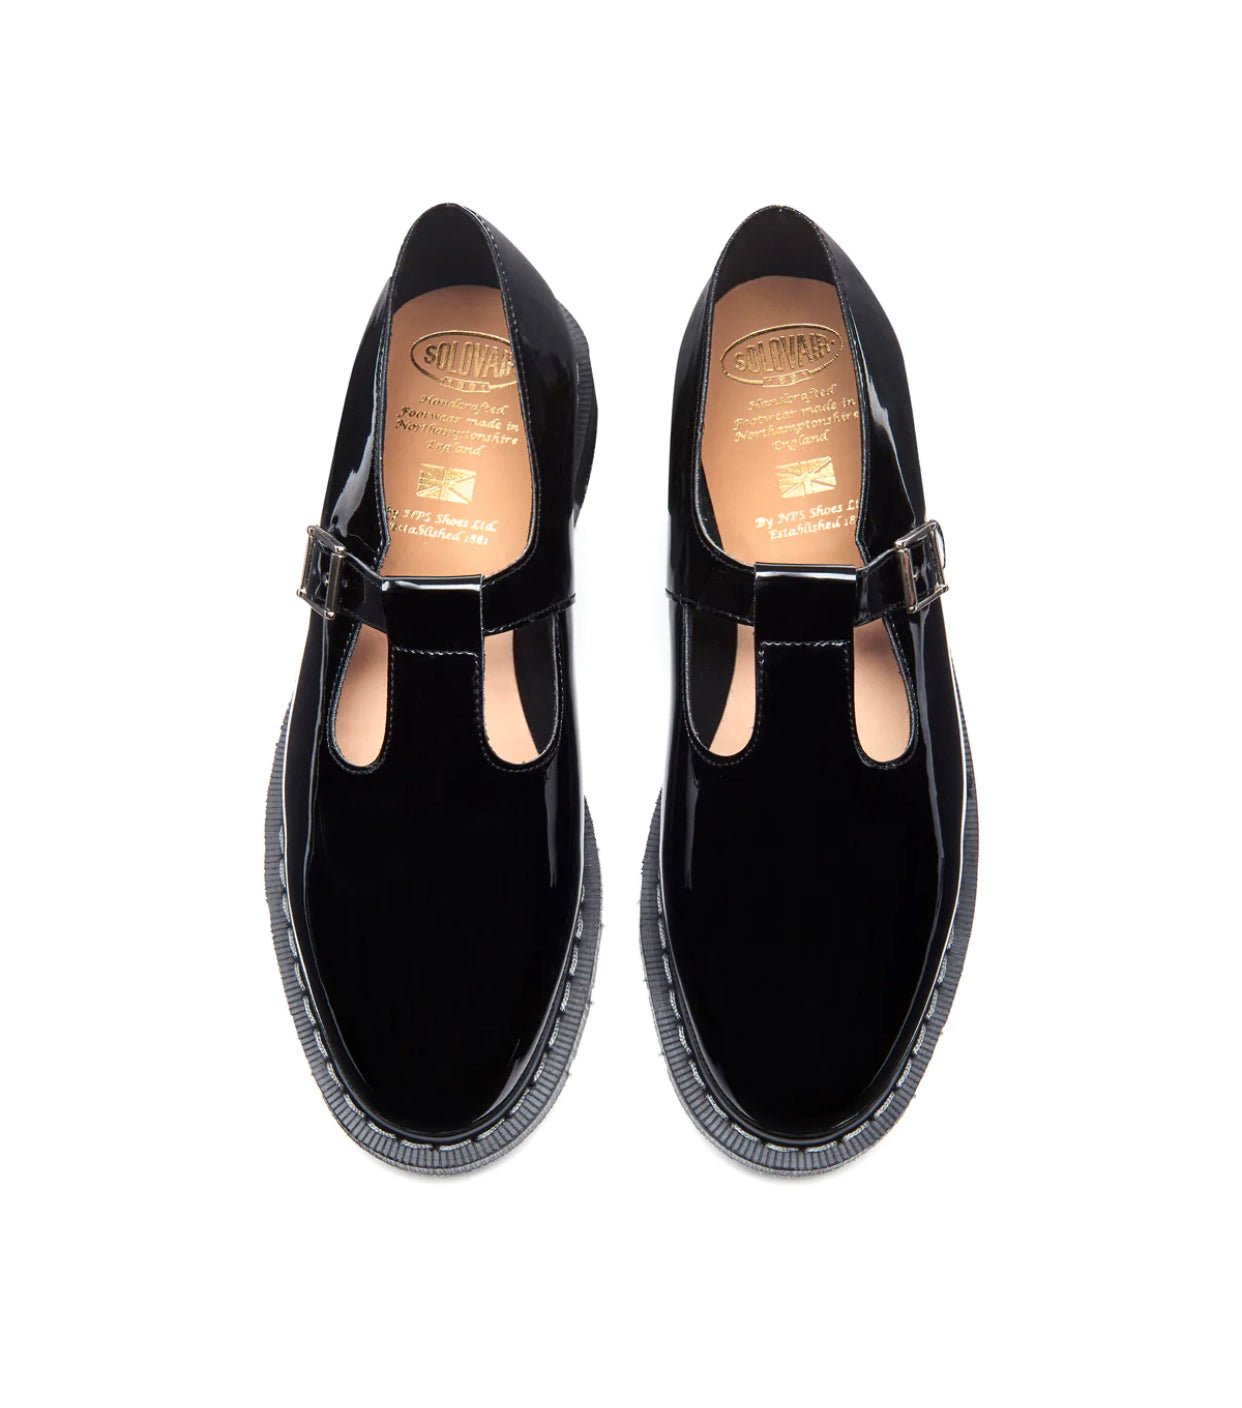 Solovair Black Patent Mary Jane White Stitch Shoe Made In England